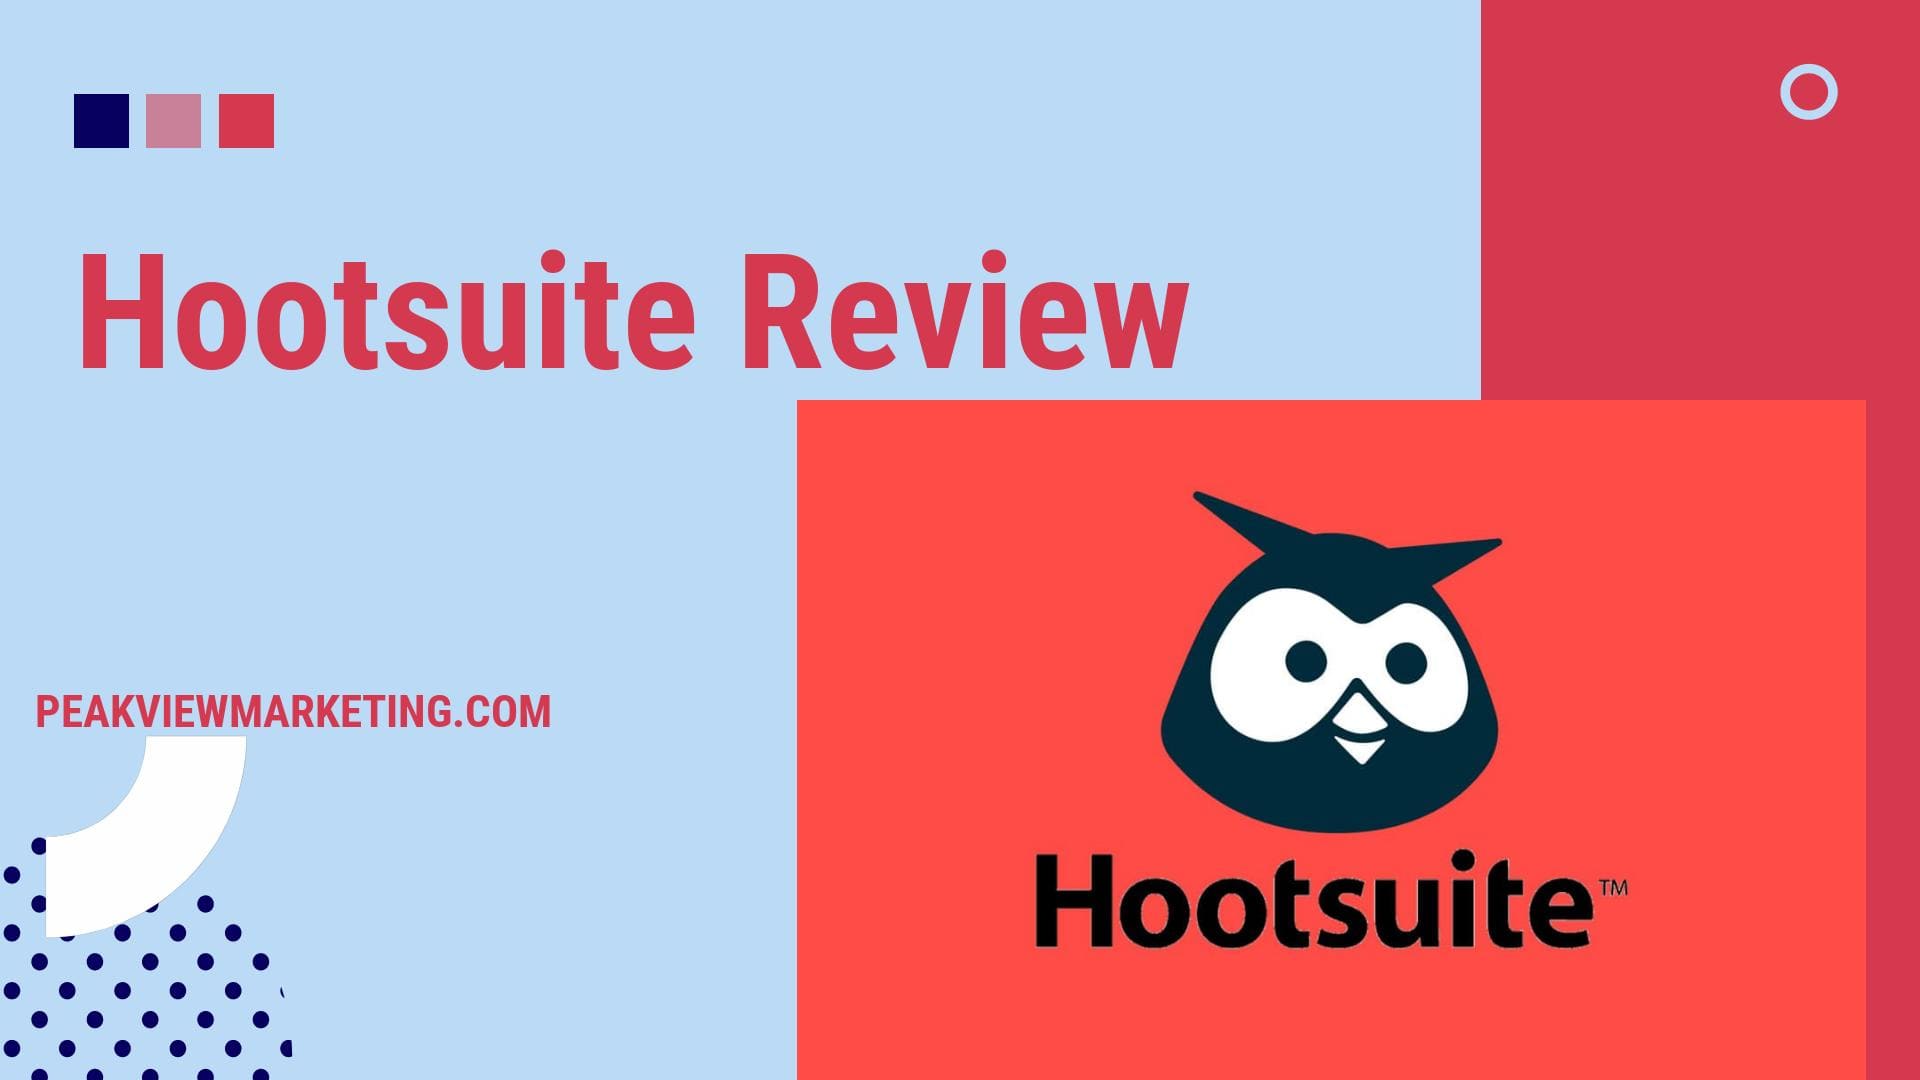 Hootsuite Review Image